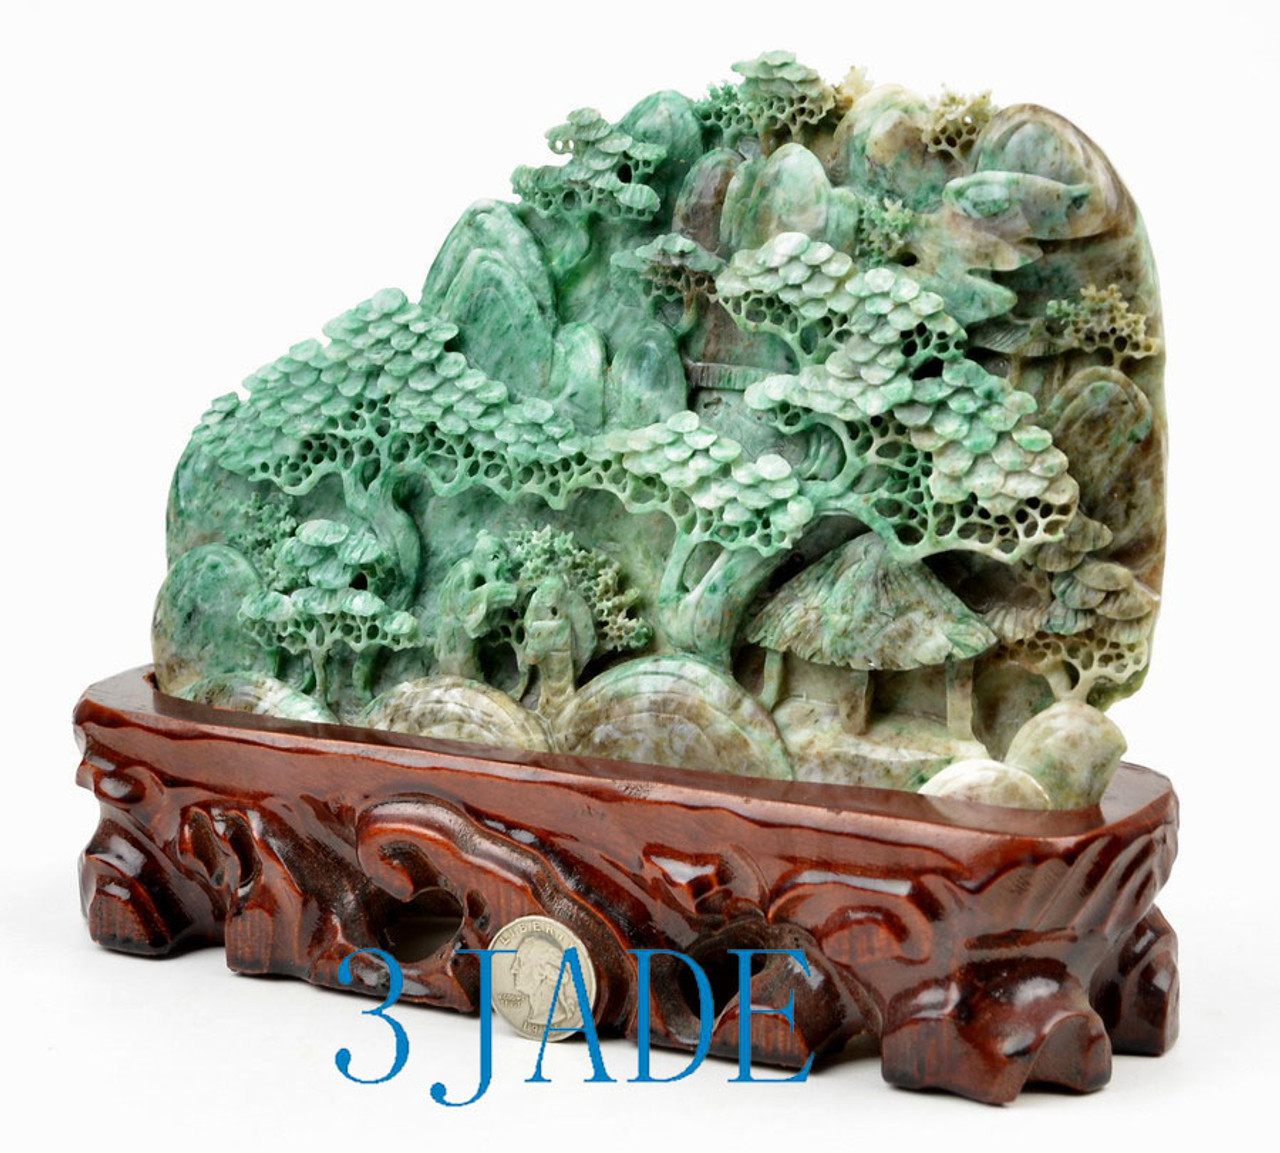 Natural Dushan Jade Traditional Chinese Mount Scenery Statue Carving Sculpture J 3jade Wholesale Of Jade Carvings Jewelry Collectables Prayer Beads